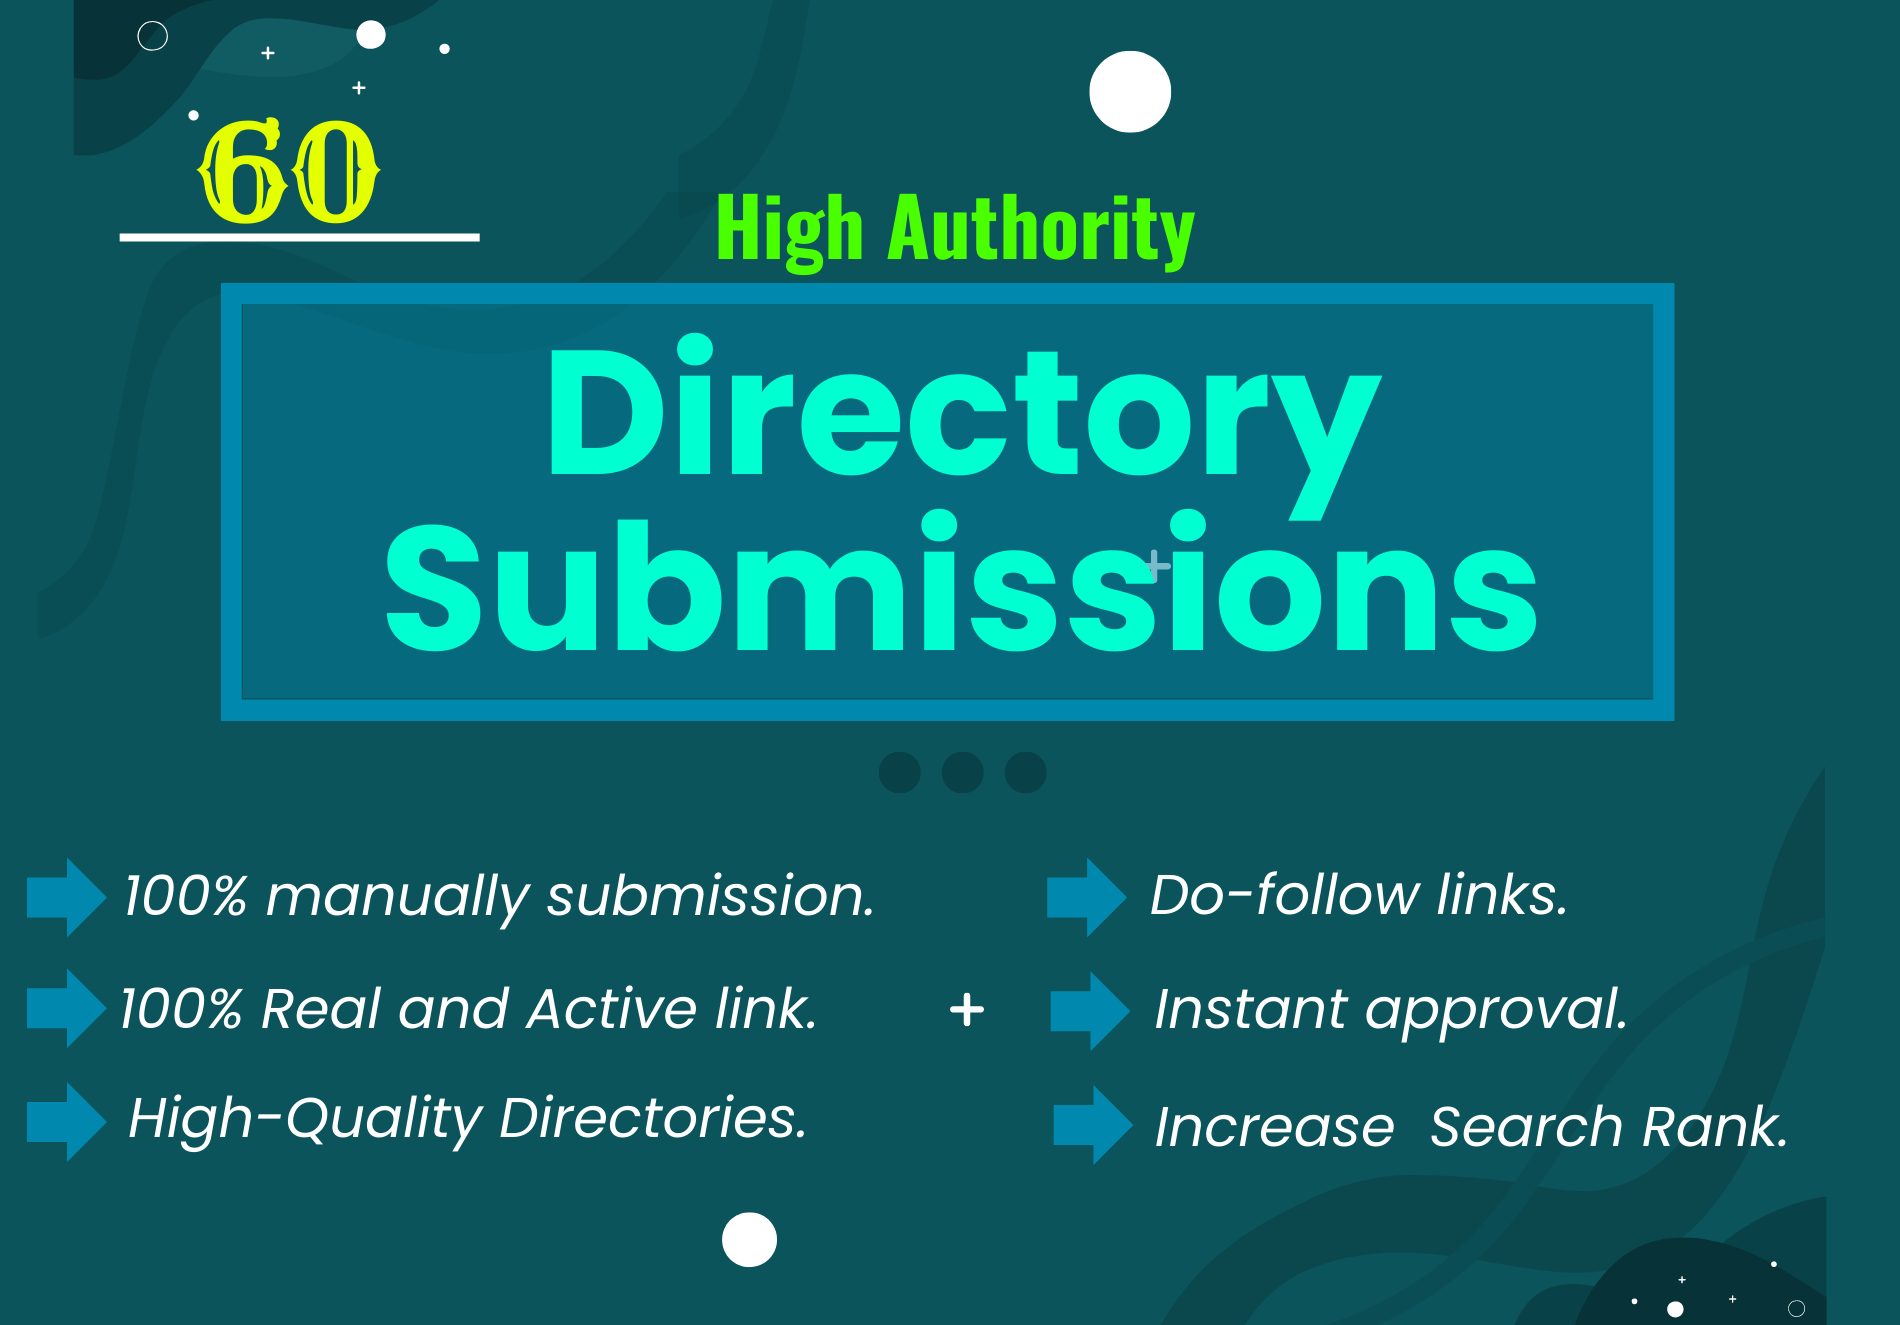 Manually create High authority 60 Directory submissions.